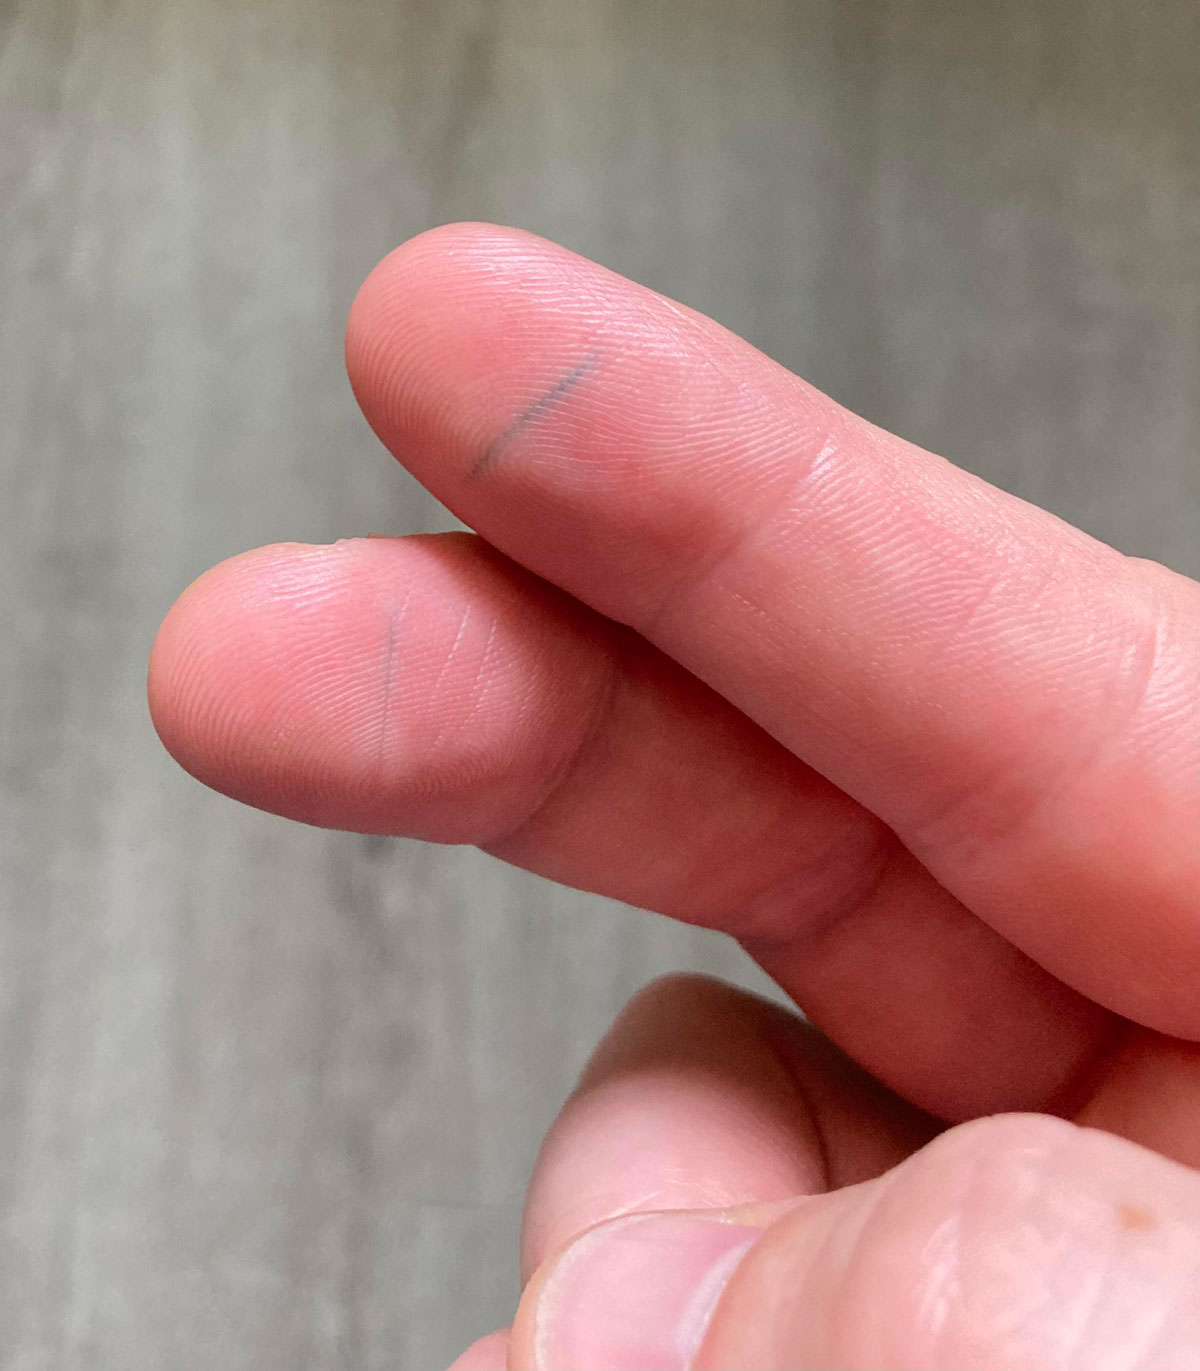 Accidental Tattoo - I cut my fingers when cleaning out a can that had some ash in it. When it healed, the ash stayed and created a tattoo on 2 of my fingers